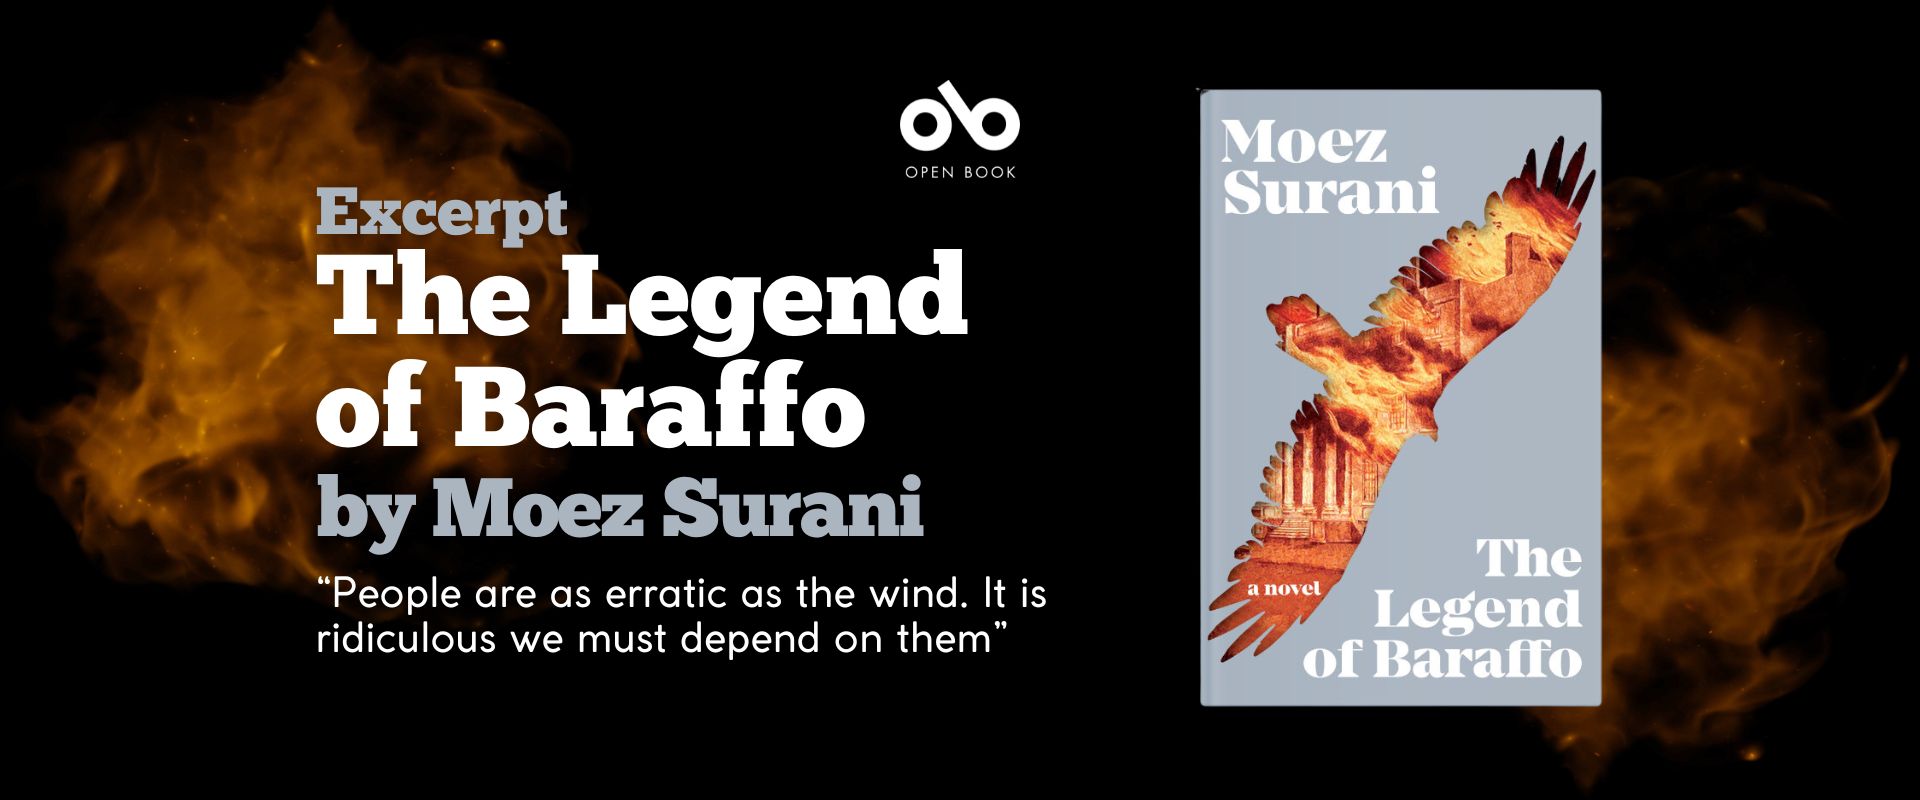 Banner image with black background and images of fireclouds on the left and right. Open Book logo top centre. Text reads Excerpt from The Legend of Baraffo by Moez Surani. People are as erratic as the wind. It is ridiculous we must depend on them. Image of the cover of the book The Legend of Baraffo by Moez Surani on the right side.